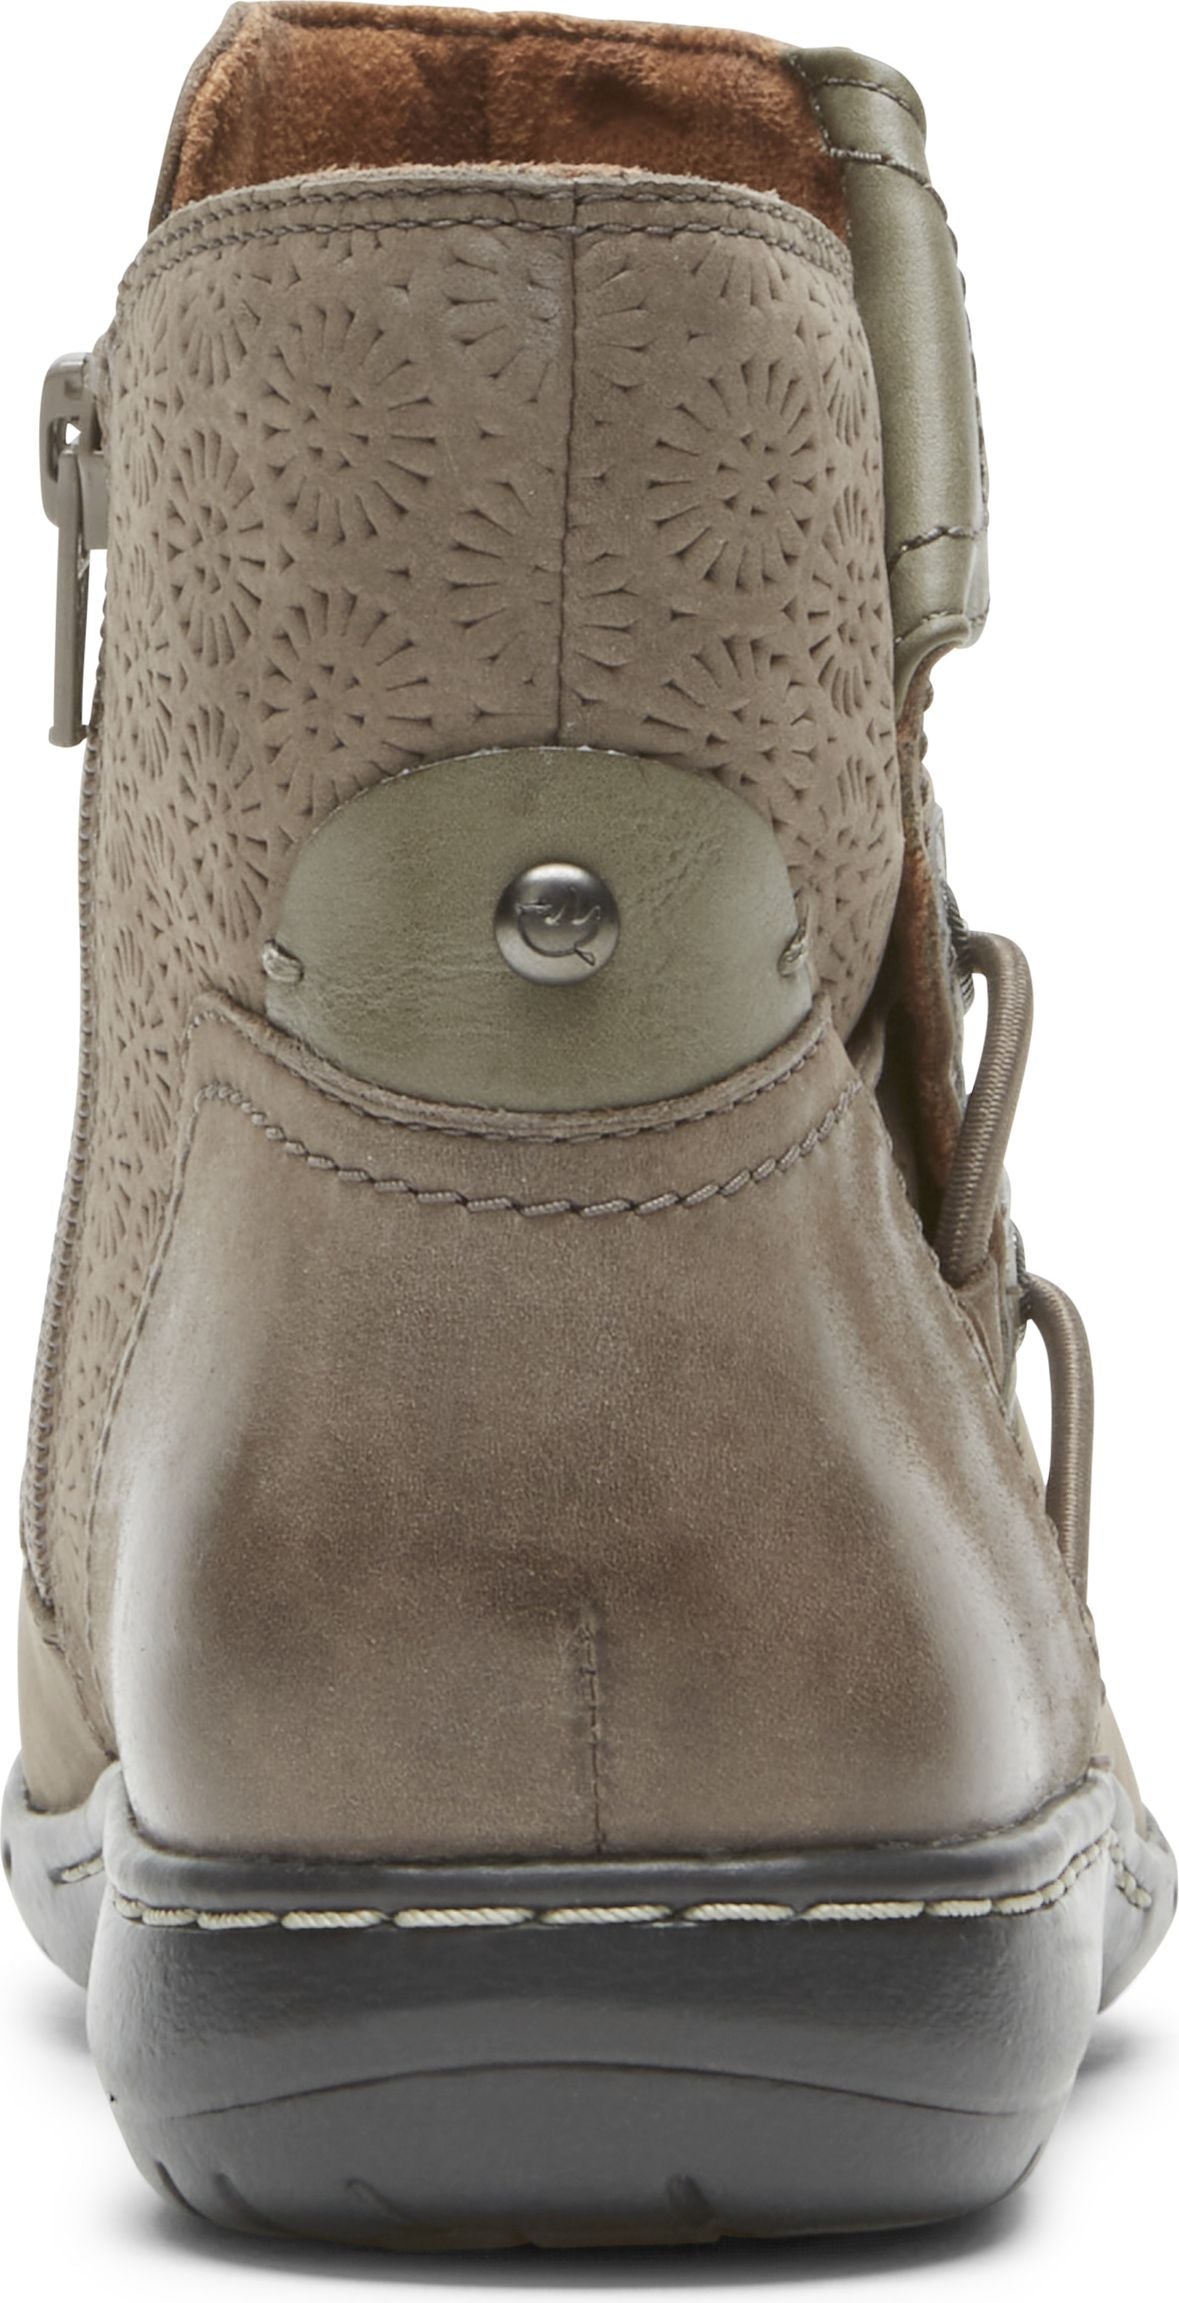 Cobb Hill Boots Penfield Ruch Boot Grey - Extra Wide